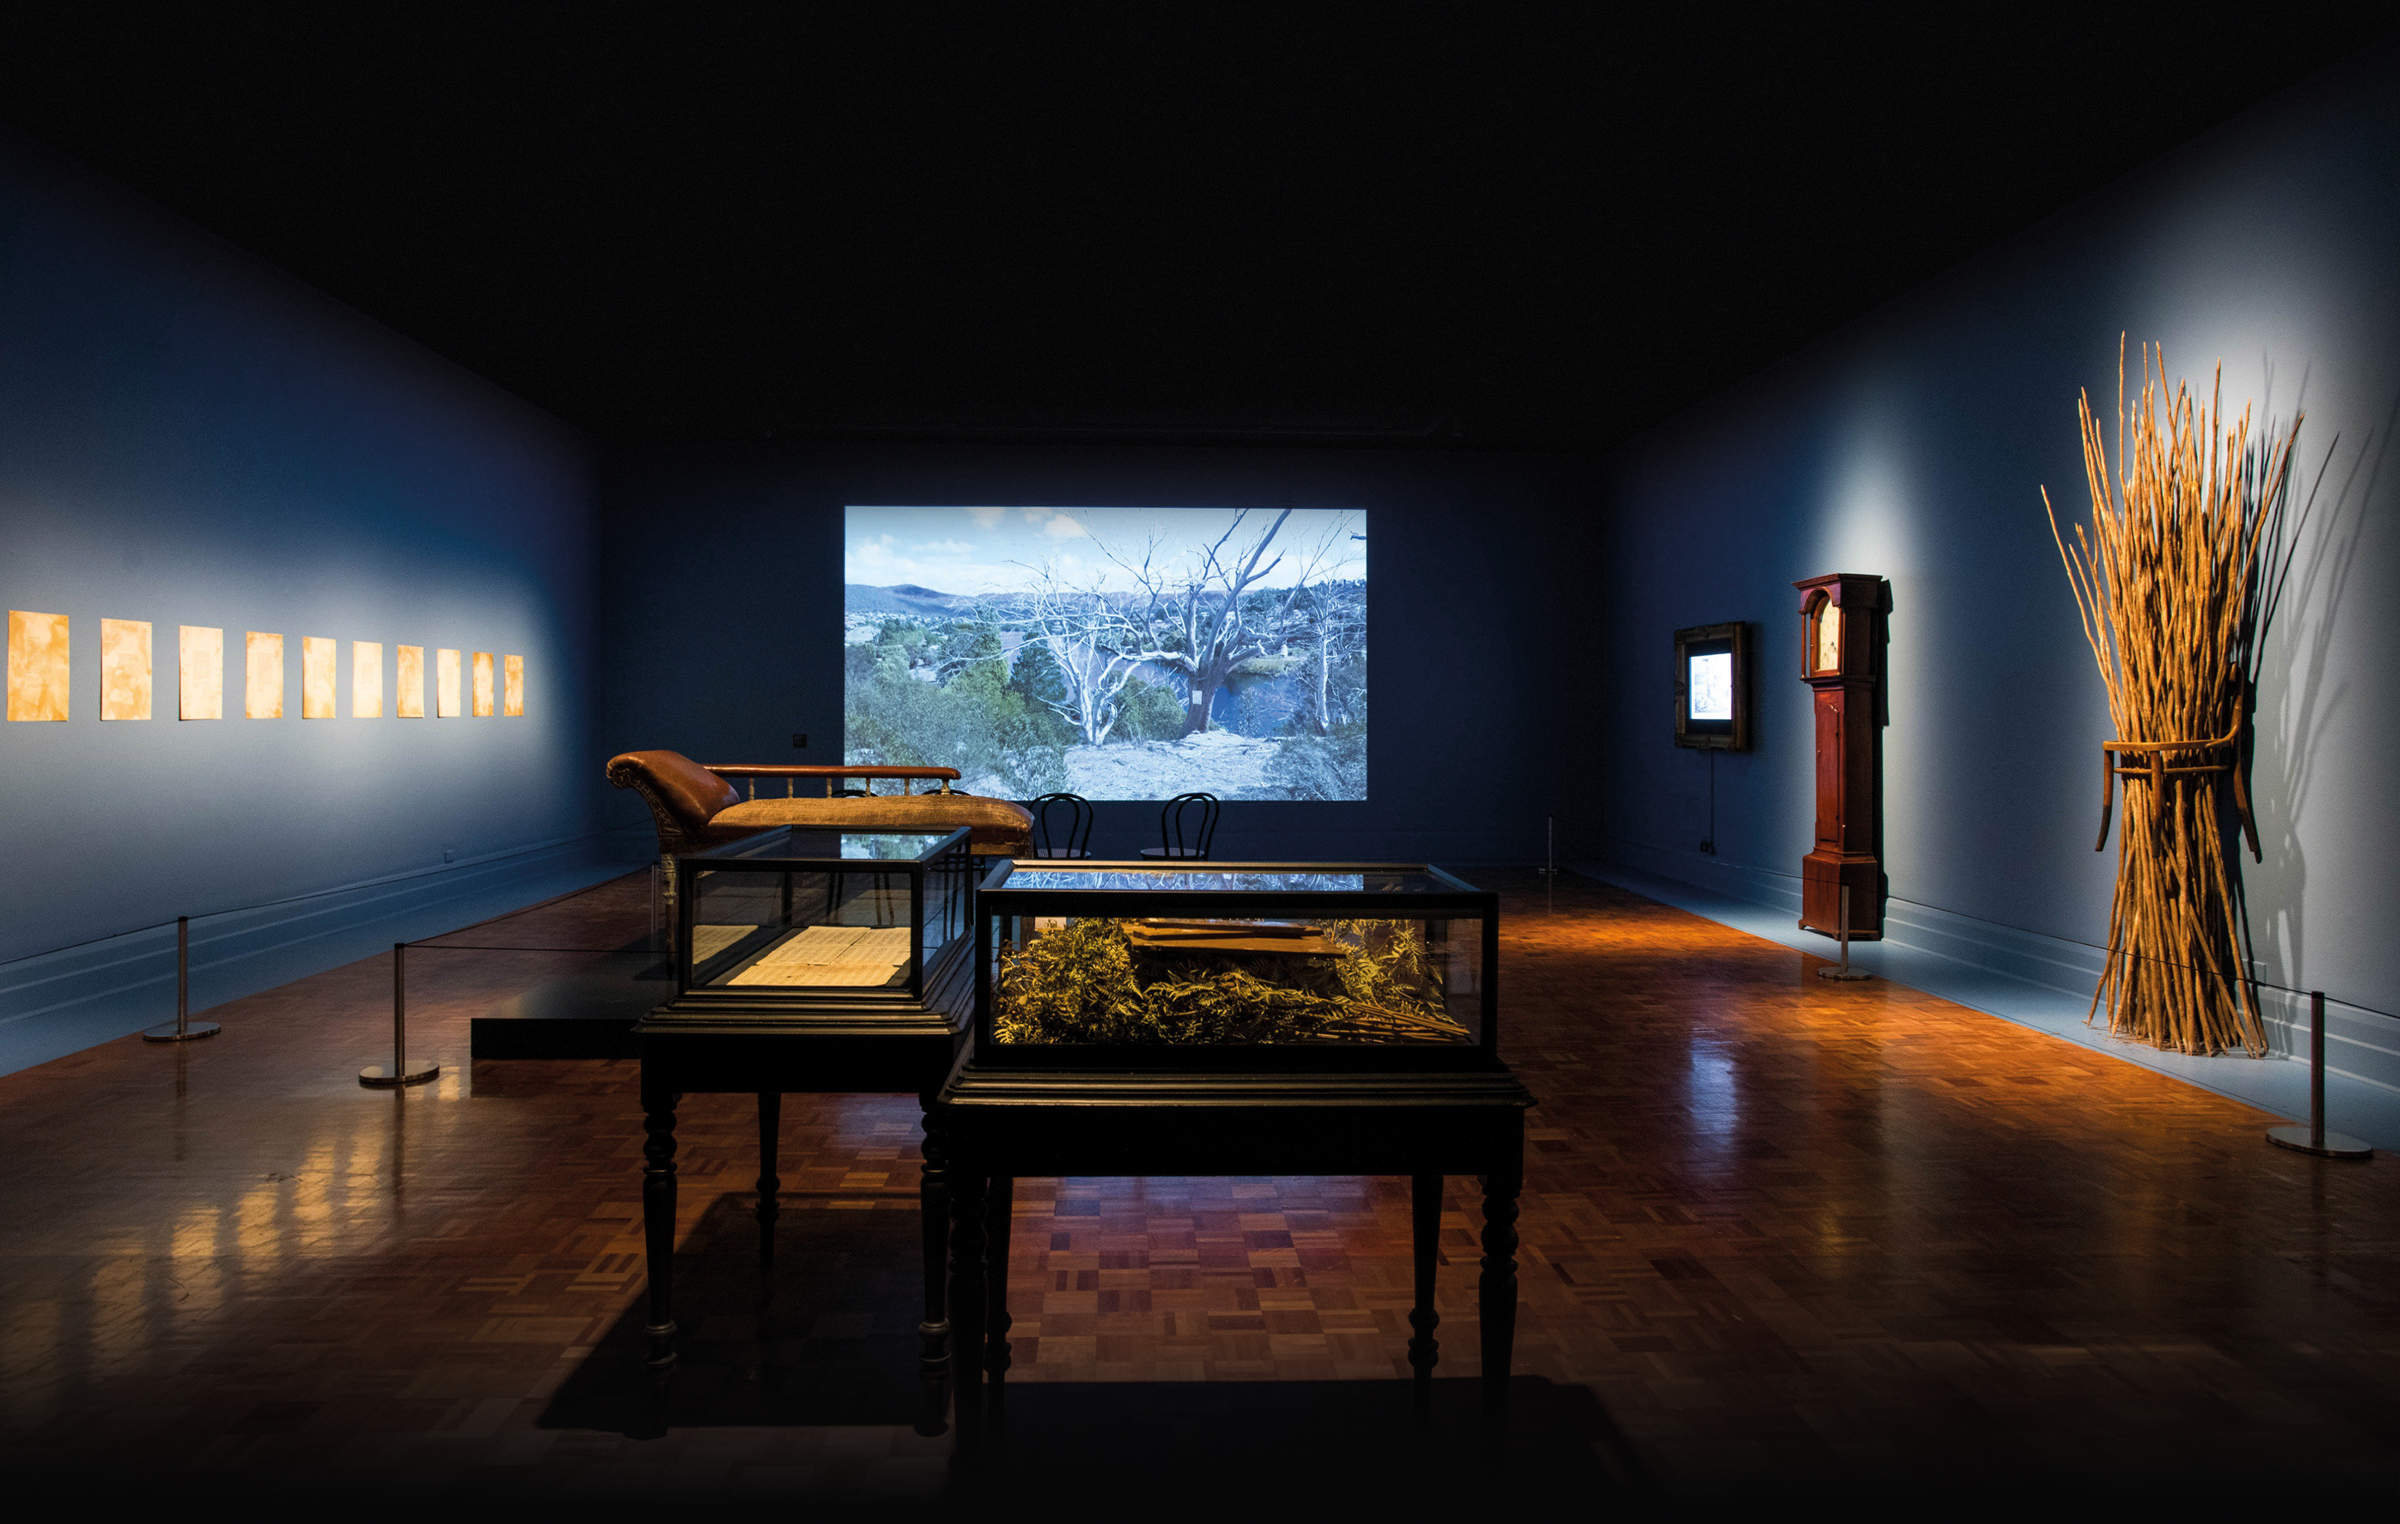 TENSE PAST exhibition image by Alistair Bett depicting a room containing multiple artworks and historical artefacts. On the left-hand wall is a work titled, ‘Hunting Ground (Haunted) Van Diemen’s Land’ (2016) consisting of 10 etching and acrylic silkscreen prints. On the front wall is a video work showing some dead trees in the landscape titled, ‘Hunting Ground (Haunted) Van Diemen’s Land’ (2016–17). A smaller video work sits on the right-hand wall titled, ‘Hunting Ground (Pastoral) Van Diemen’s Land’ (2016–17). Next to the screen on the same wall is a mahogany and painted copper Longcase clock c.1820. Alongside the clock is a sculptural work titled, ‘Some Tasmanian Aboriginal Children Living with Non-Aboriginal People before 1840’ (2008) consisting of a found chair with burnt tea tree sticks with names carved on them. In the centre of the room is a Sofa table c.1850 made from Huon pine, Australian red cedar and non-native white pine. The final work titled, ‘Luna riabi (song)’ (2019) is an audio work with music score referencing ‘Song of the Aborigines’ 1856 by Mrs Maria Logan (1808–1886).